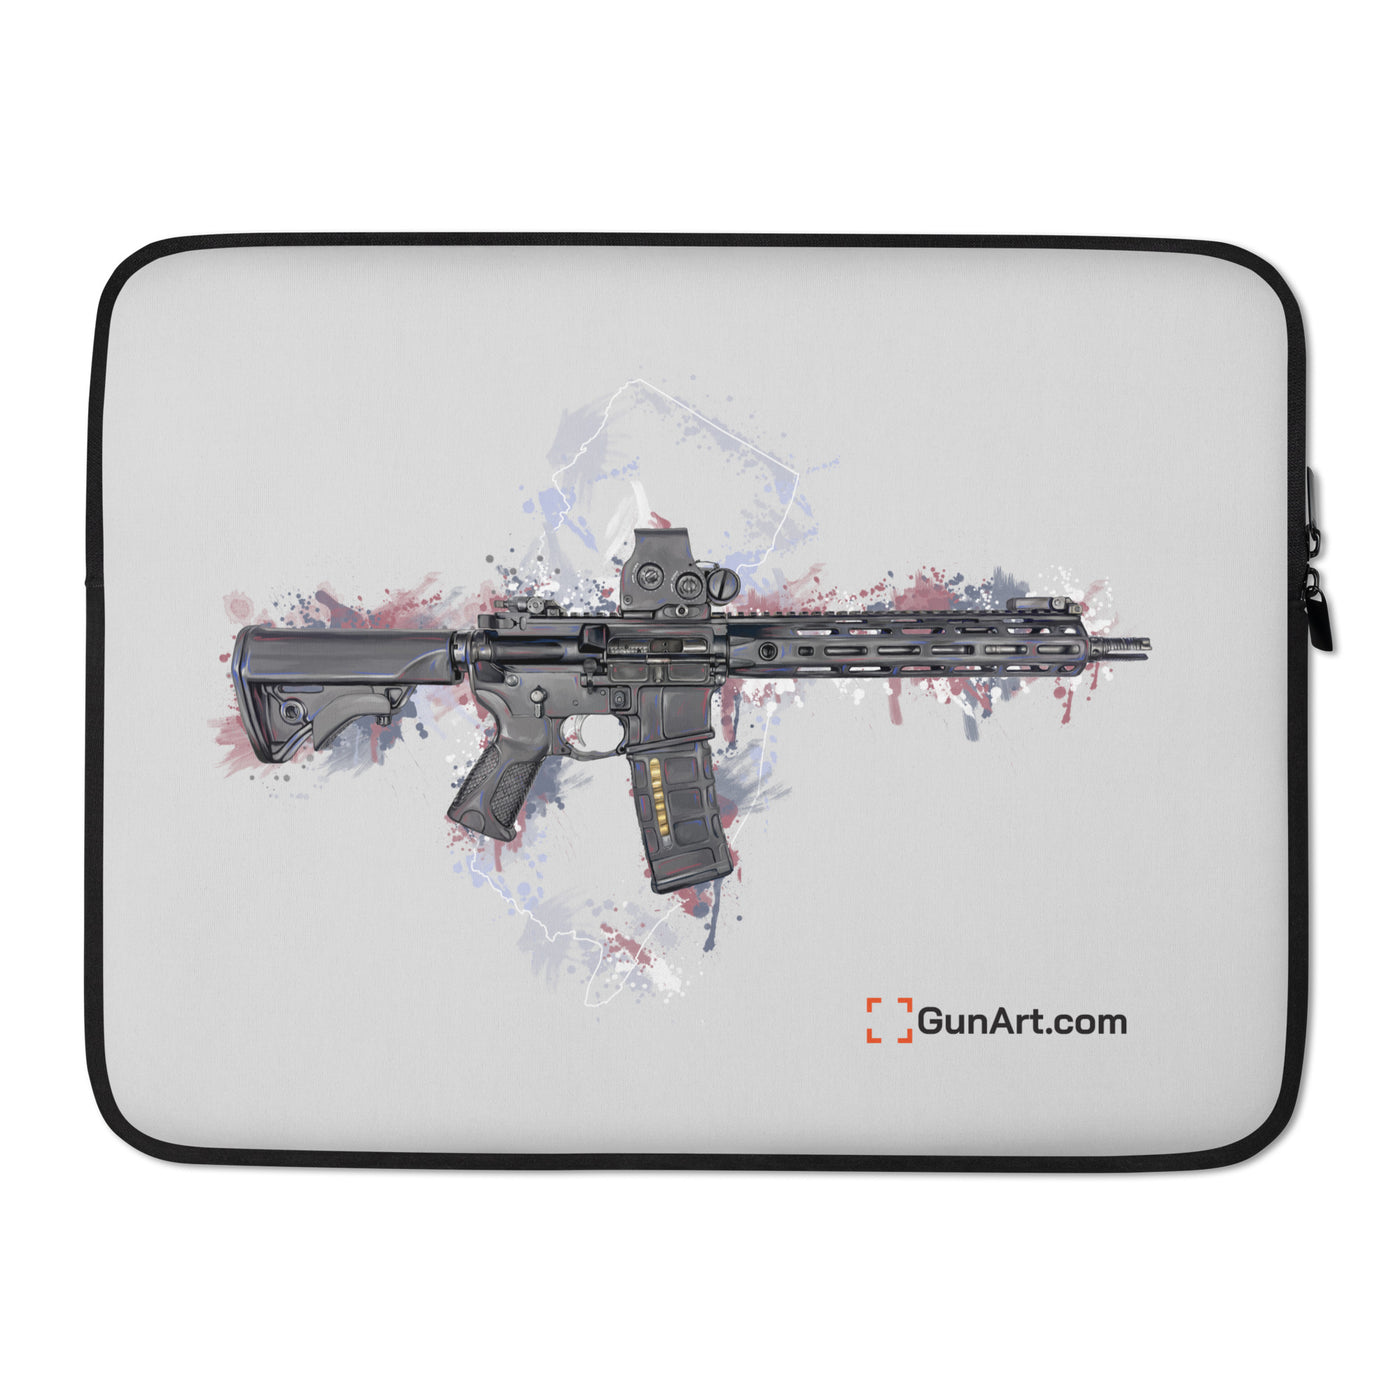 Defending Freedom - New Jersey - AR-15 State Laptop Sleeve - White State